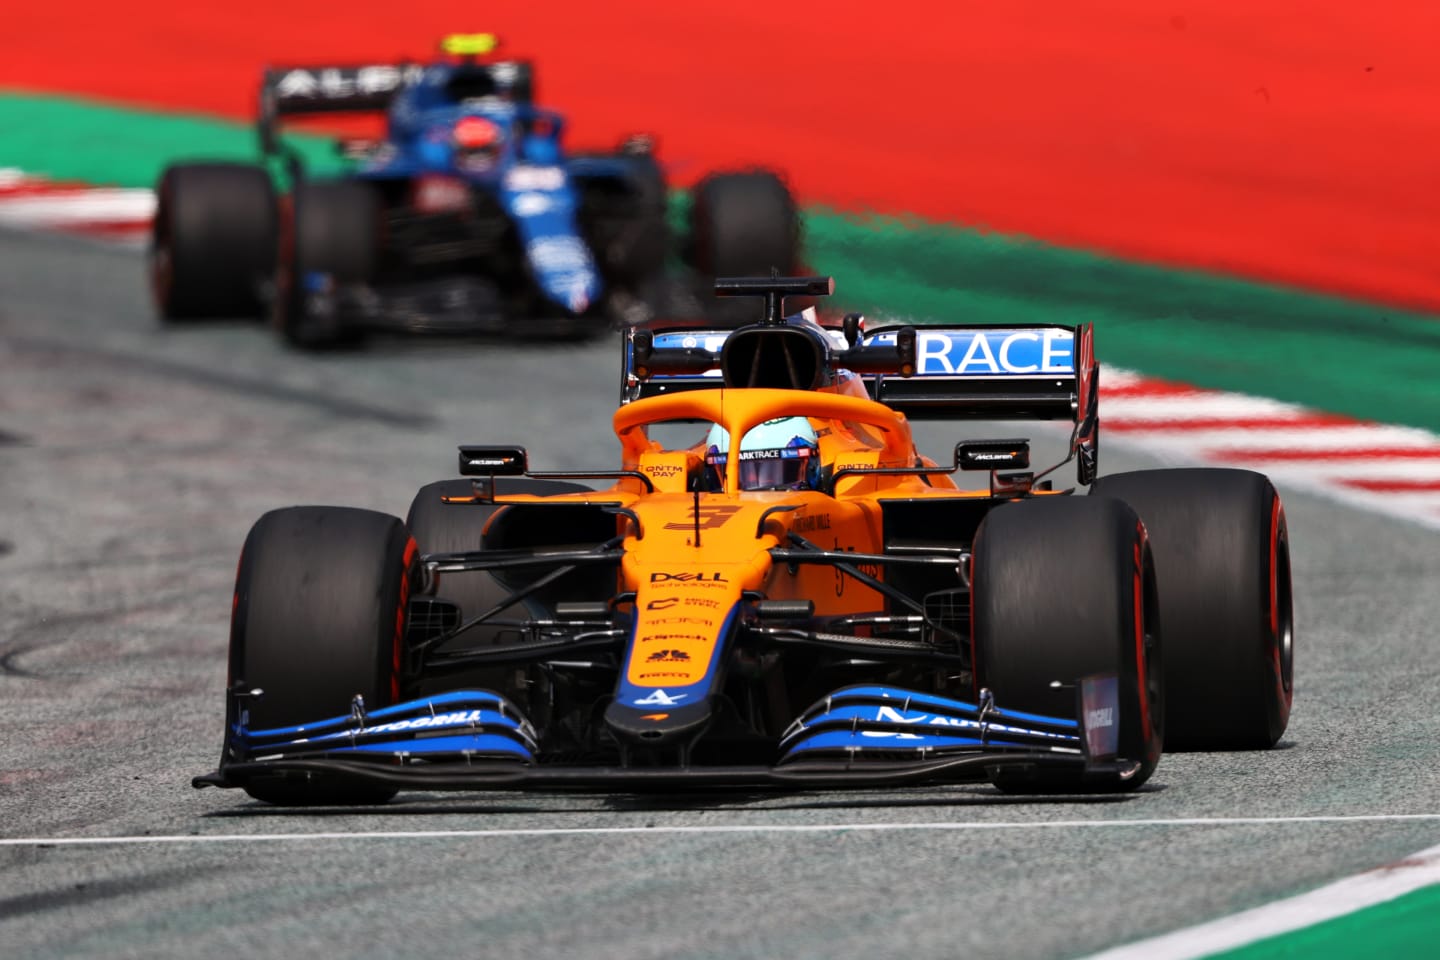 SPIELBERG, AUSTRIA - JUNE 25: Daniel Ricciardo of Australia driving the (3) McLaren F1 Team MCL35M Mercedes leads Esteban Ocon of France driving the (31) Alpine A521 Renault on track during practice ahead of the F1 Grand Prix of Styria at Red Bull Ring on June 25, 2021 in Spielberg, Austria. (Photo by Bryn Lennon/Getty Images)